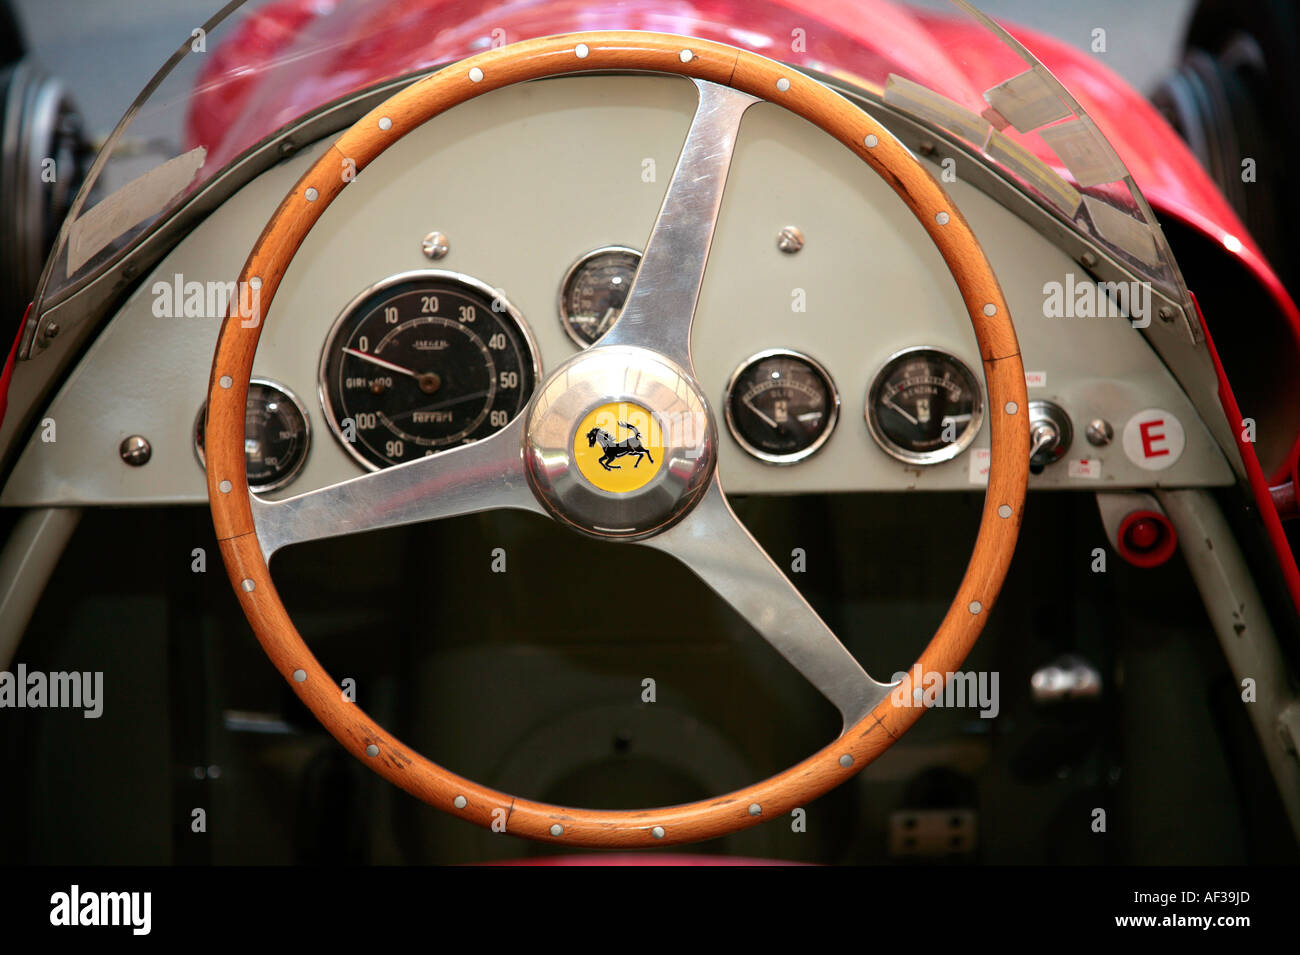 1952 Ferrari 500/625 cockpit and wheel at the Goodwood Festival of Speed, Sussex, England. Stock Photo